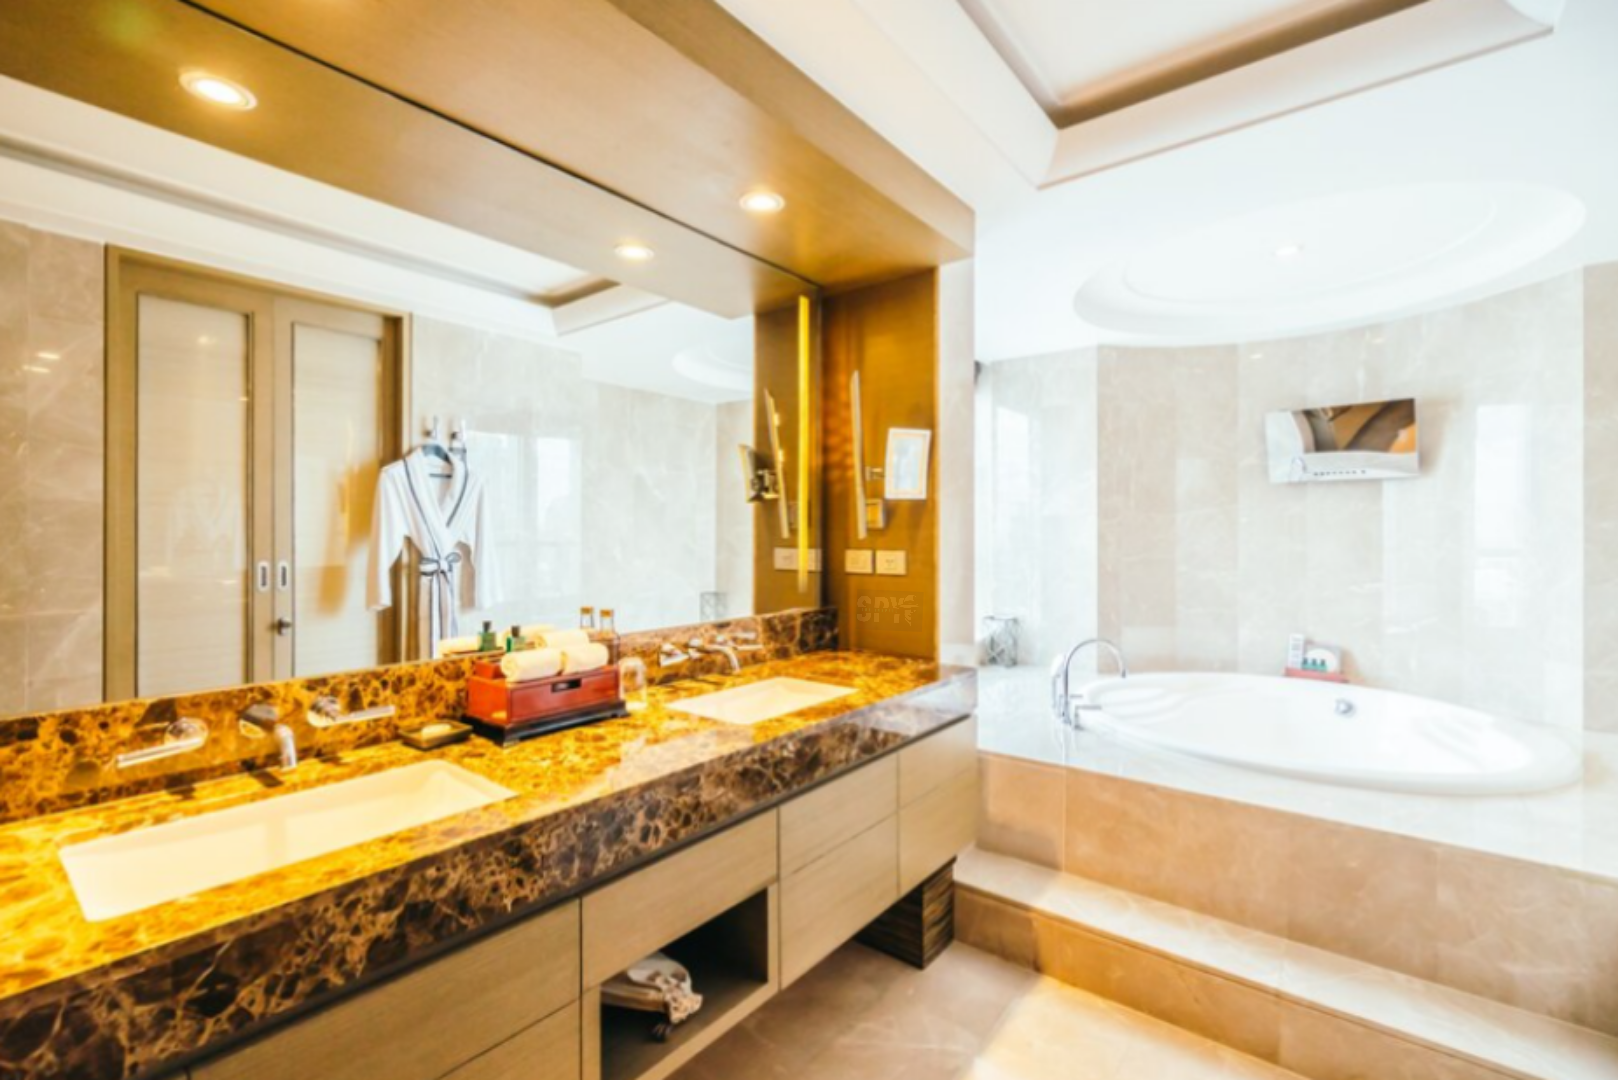 Shedding Light on the Significance of Lighting in Bathroom Renovations